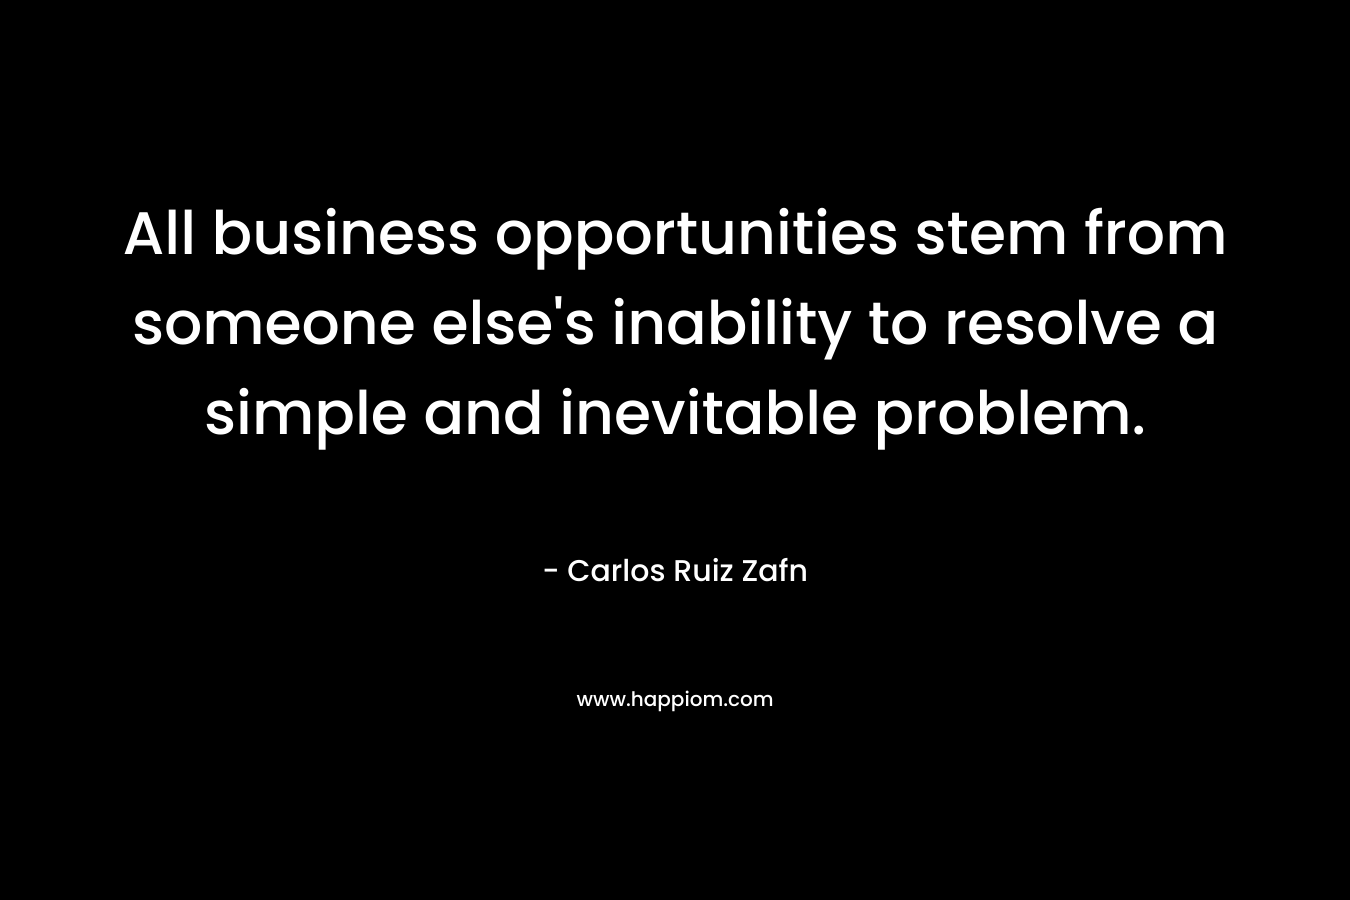 All business opportunities stem from someone else's inability to resolve a simple and inevitable problem.